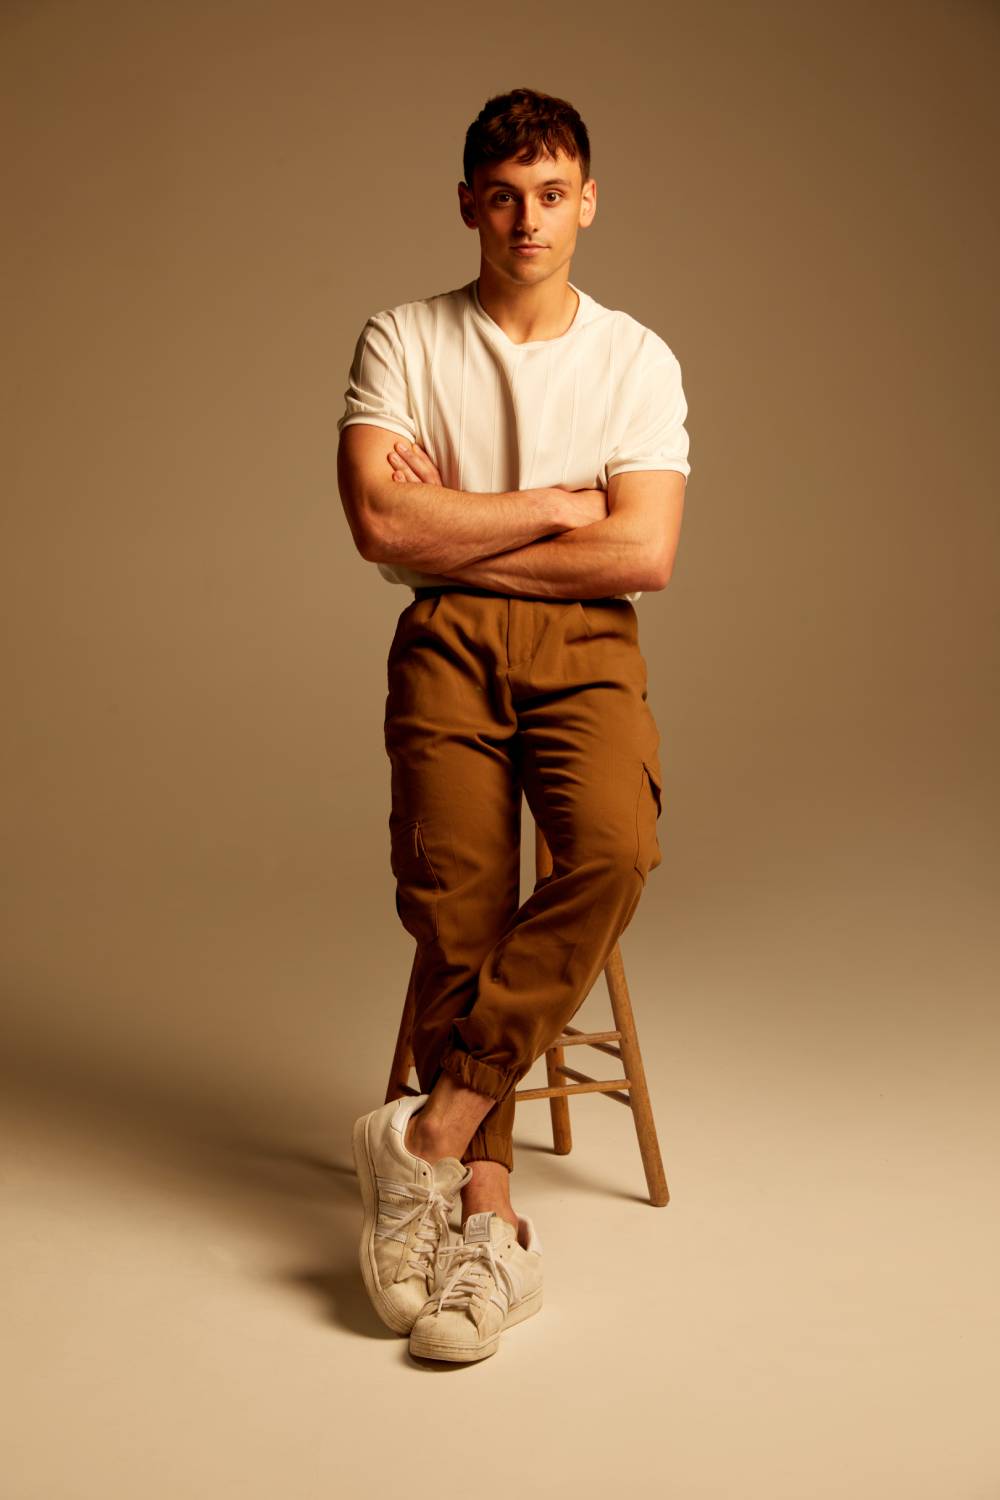 Tom Daley sits on a stool in front of a neutral background